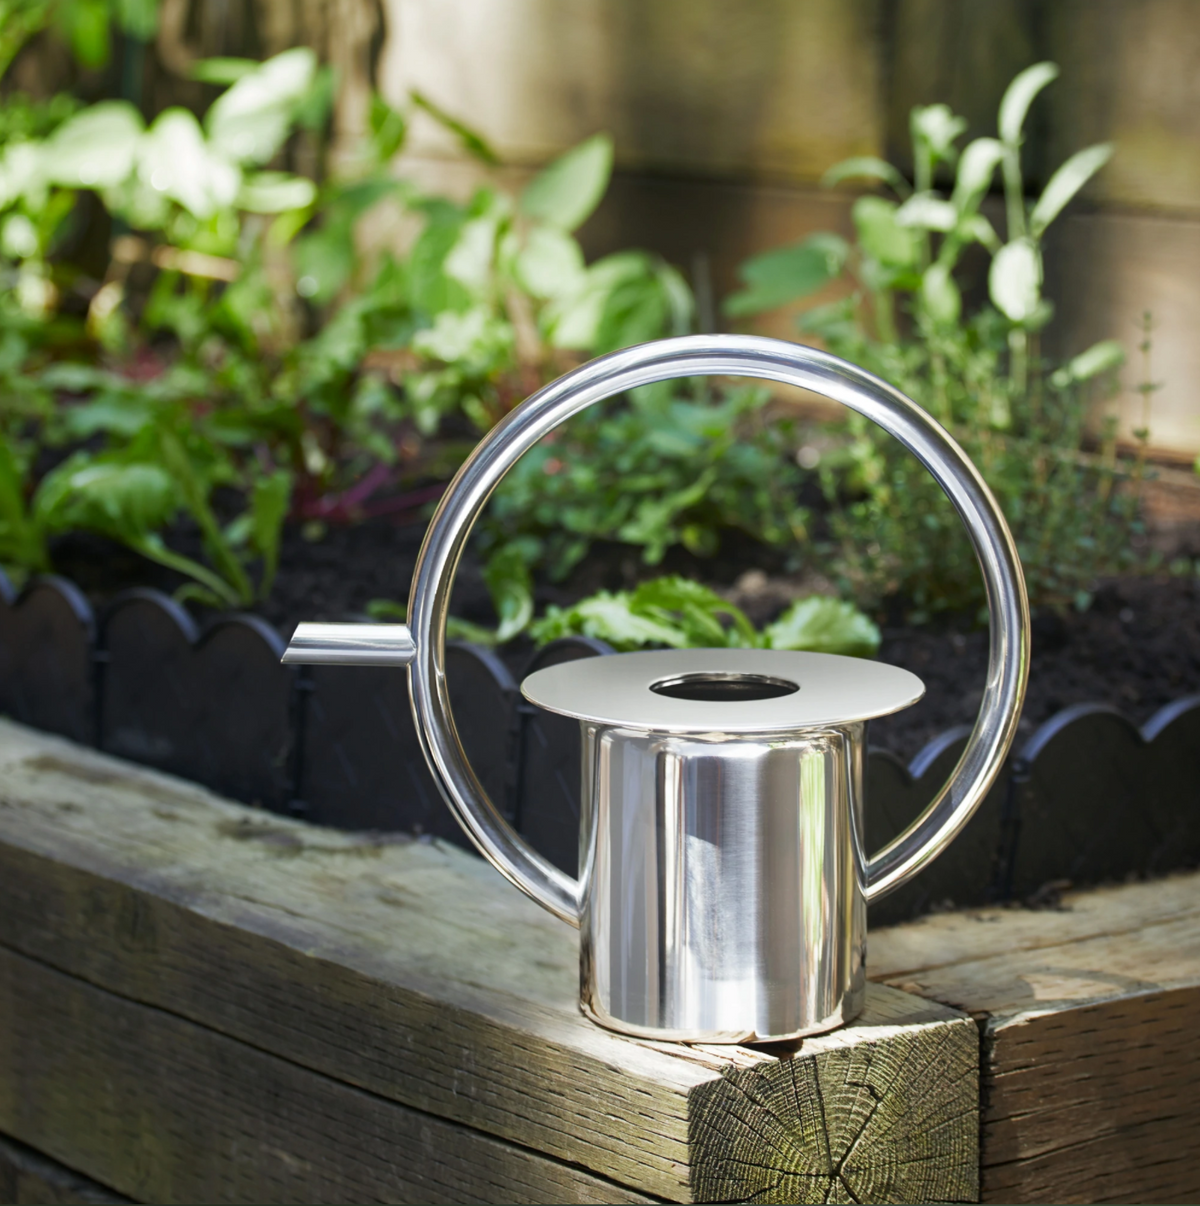 The Quench Watering Can outdoors near a garden.